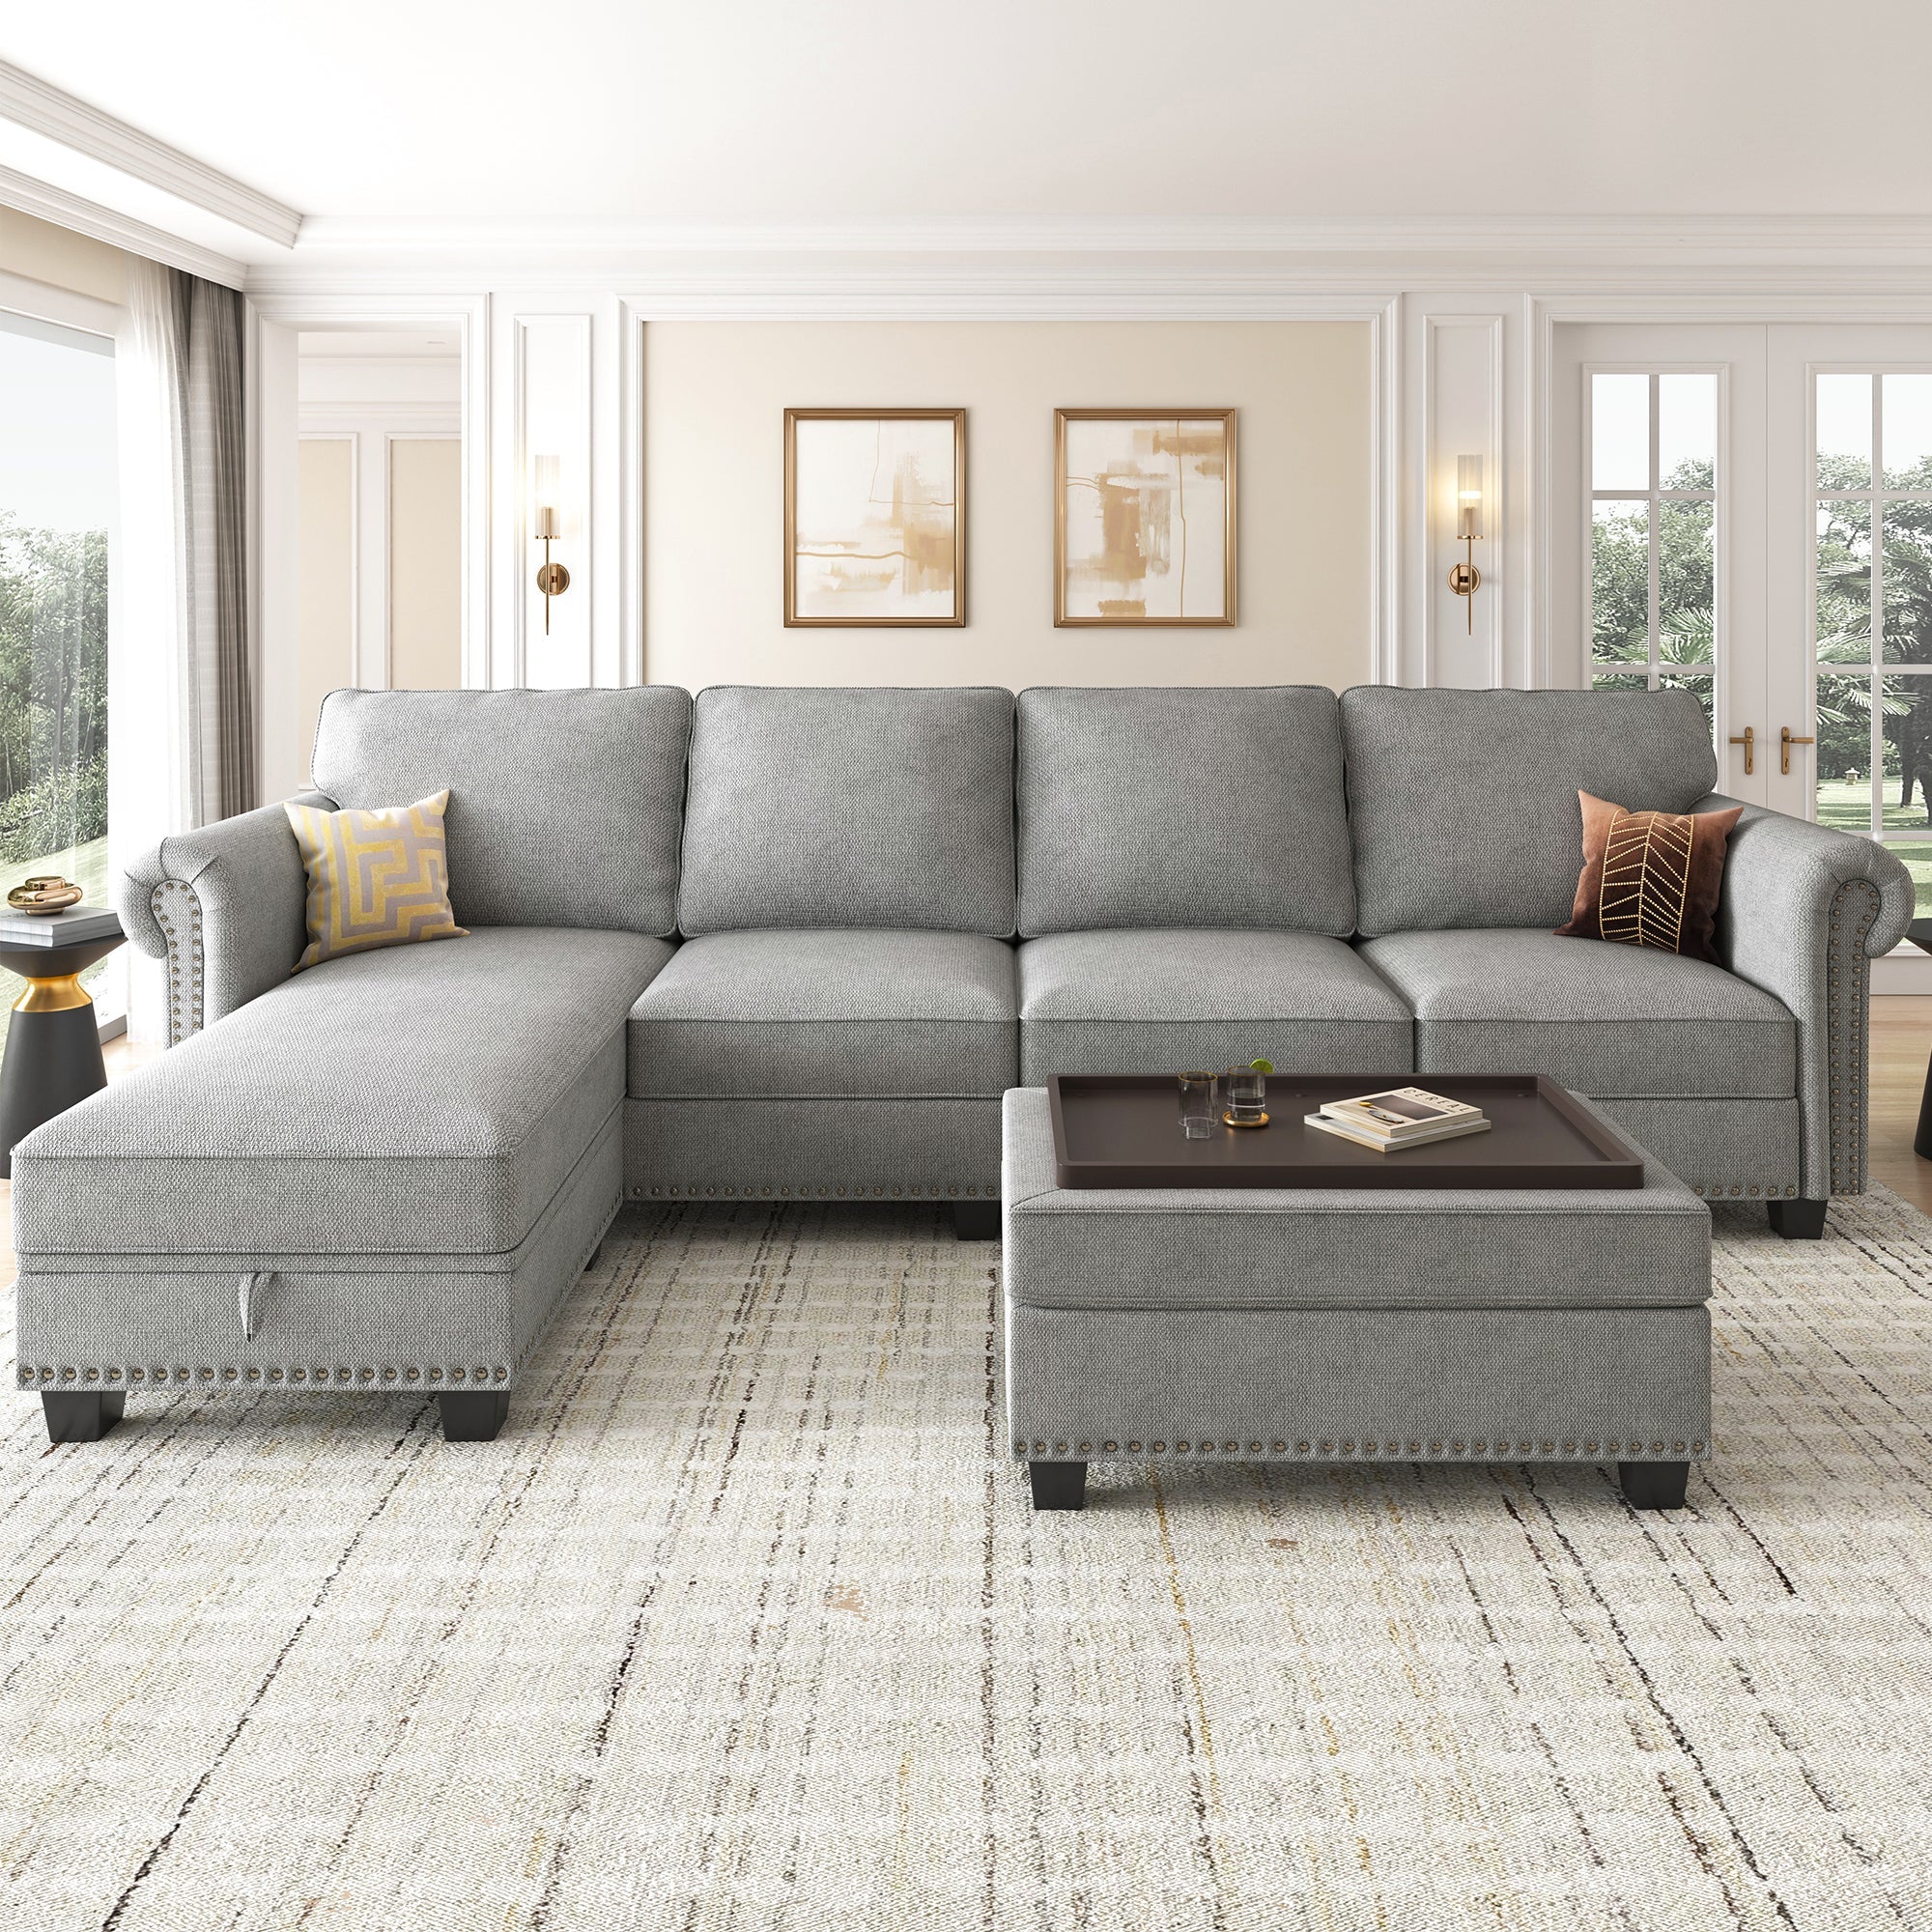 NOLANY 5-Piece Polyester Convertible Sectional With Tray Ottoman